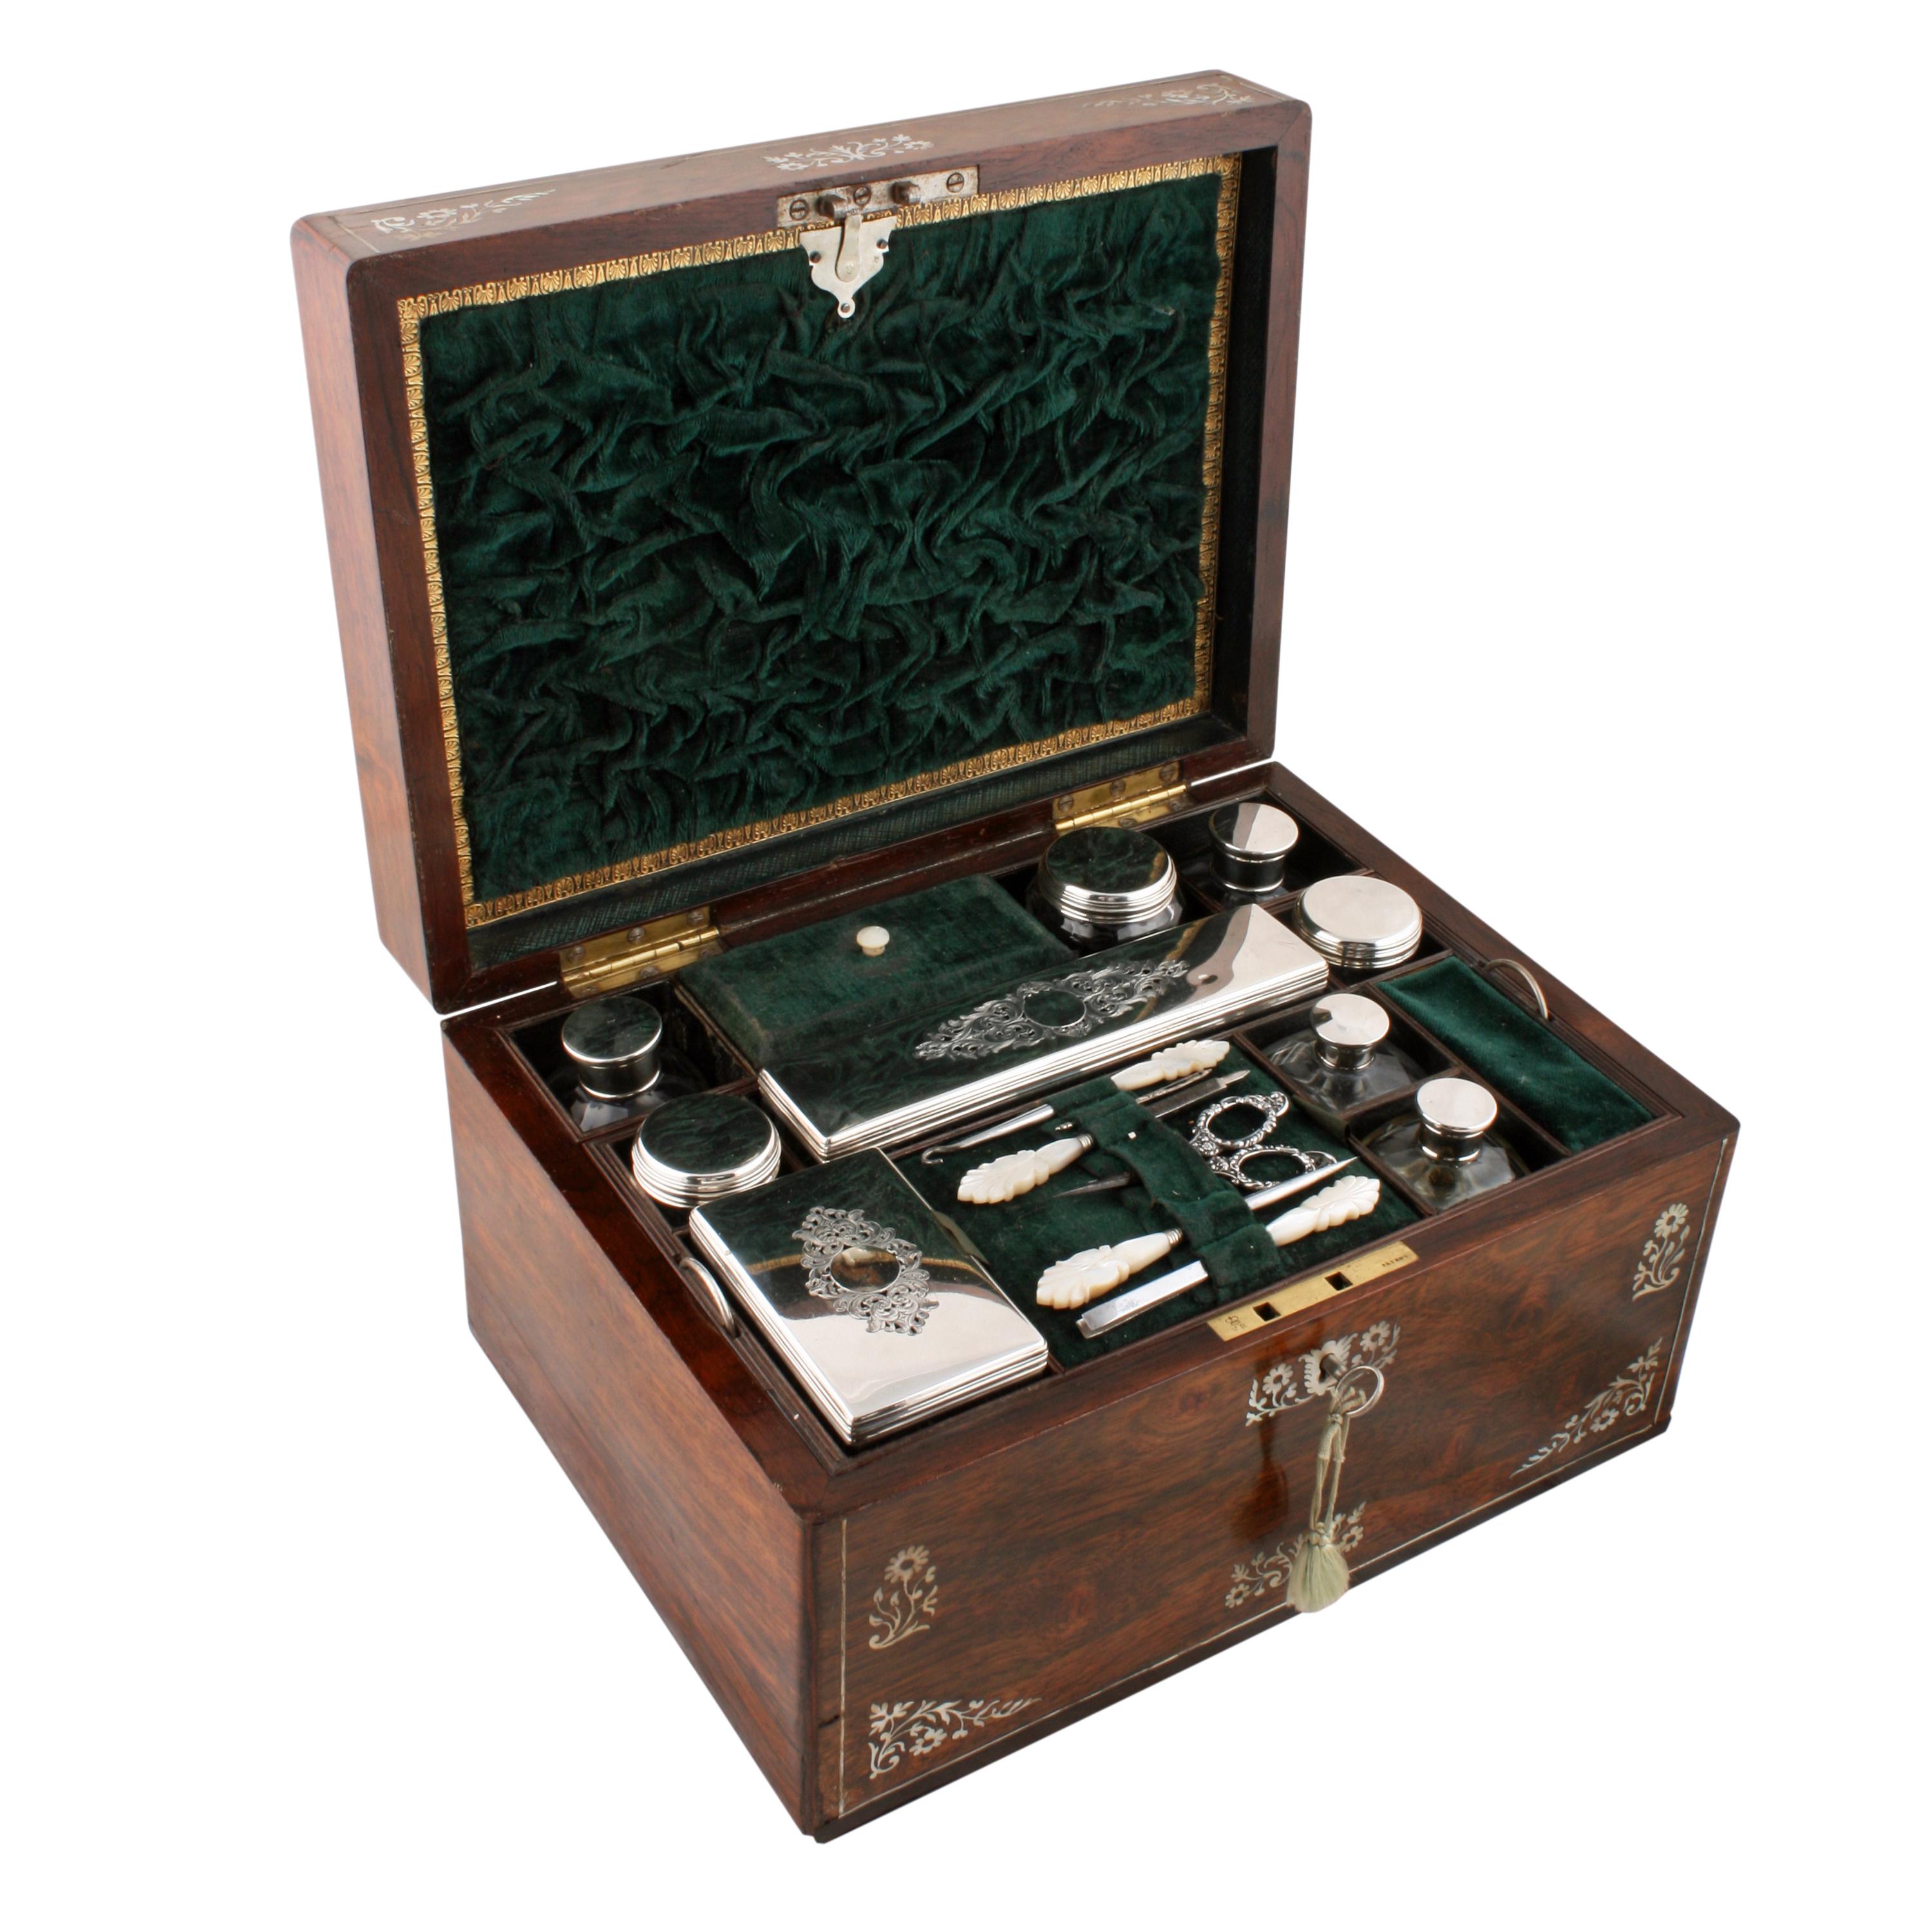 Victorian jewelry dressing box.


A mid-19th century Victorian rosewood jewelry or dressing box.

The box is inlaid with mother of pearl and pewter and has a side drawer to hold jewellery.

The interior has several jars and bottles with